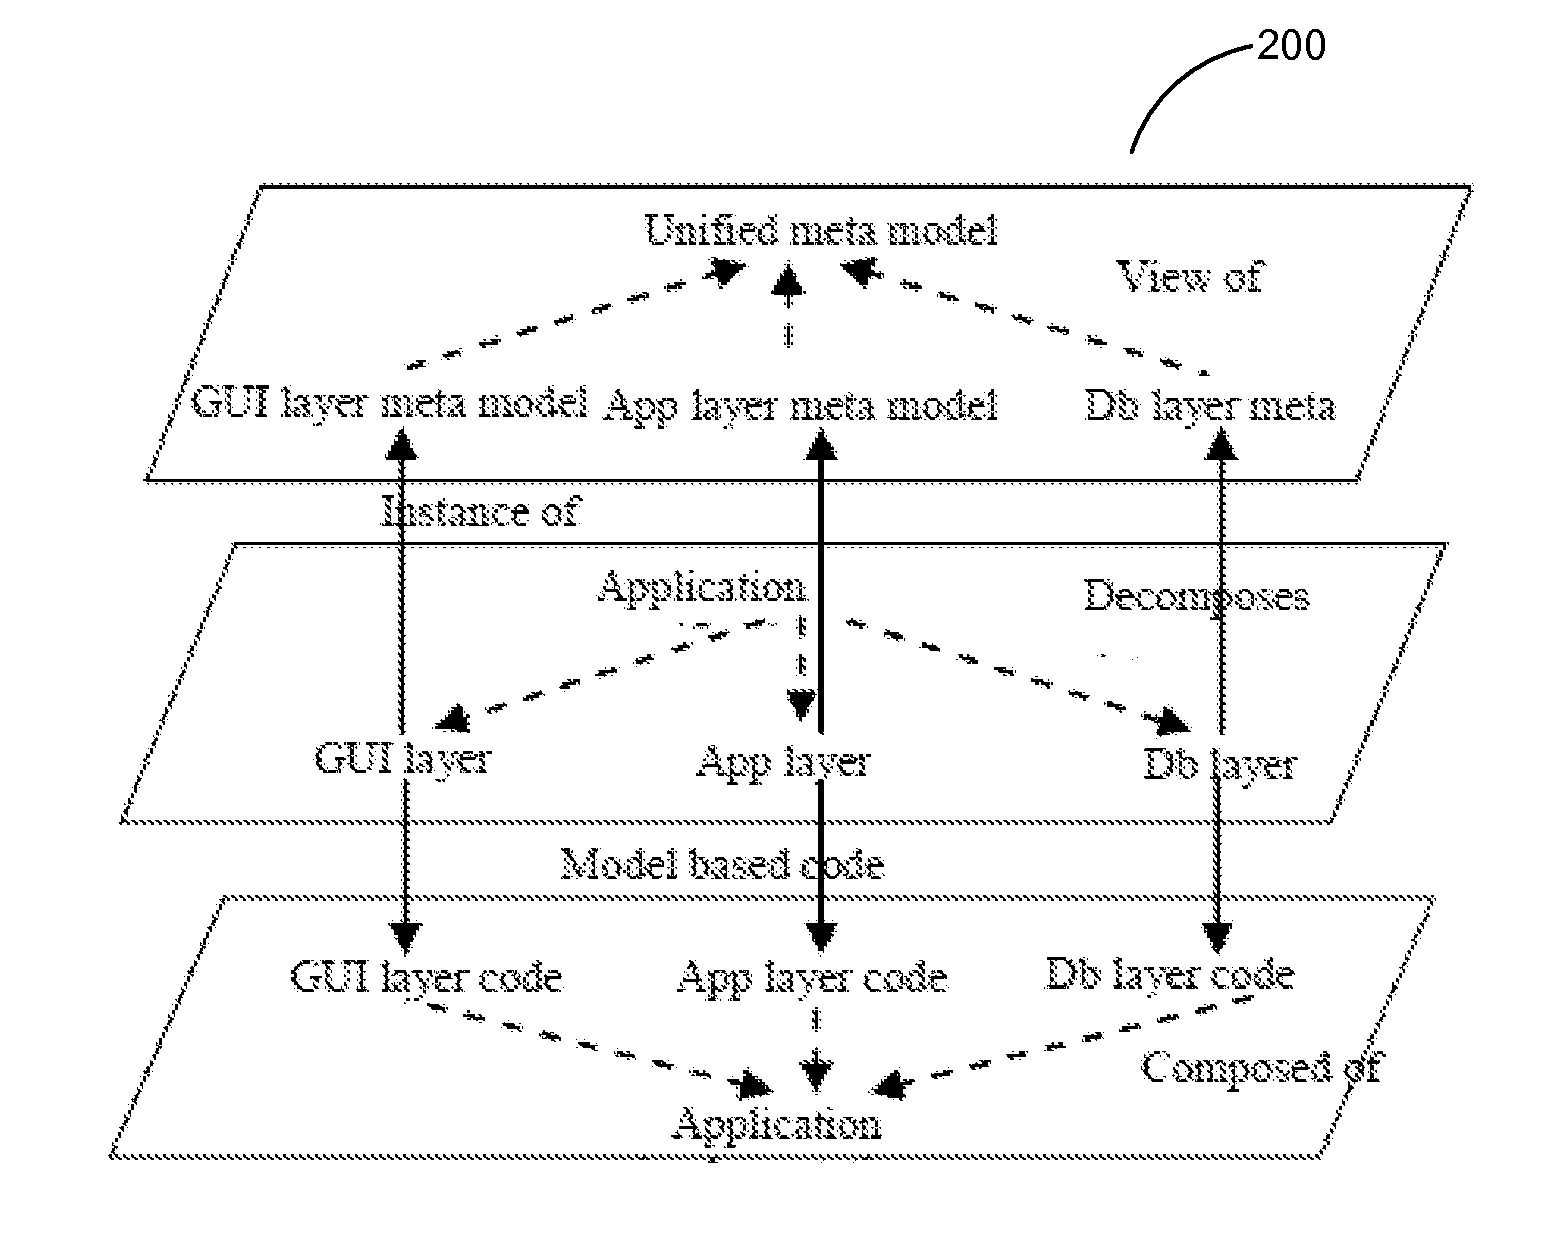 Computationally efficient system for developing configurable, extensible business application product lines using model-driven techniques